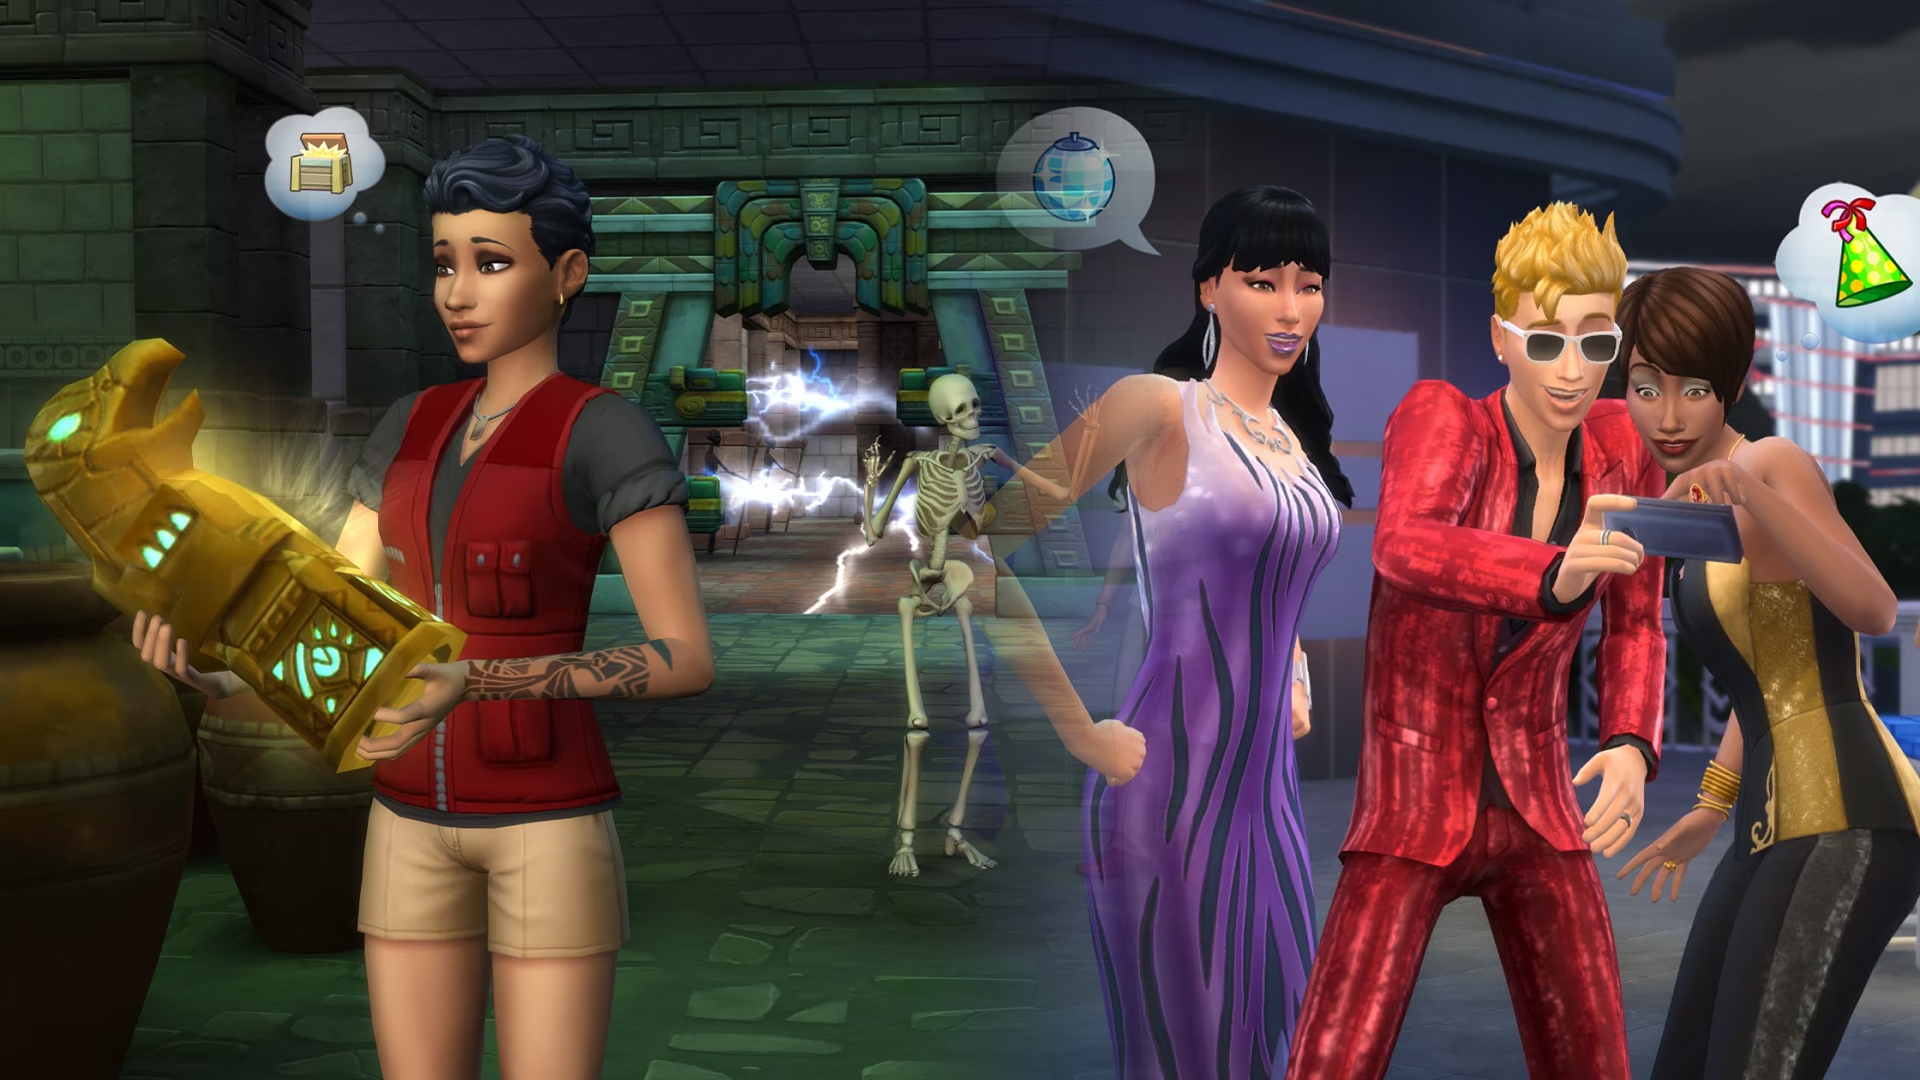 The Sims 4 Daring Lifestyle: 3 FREE Packs on Epic Games